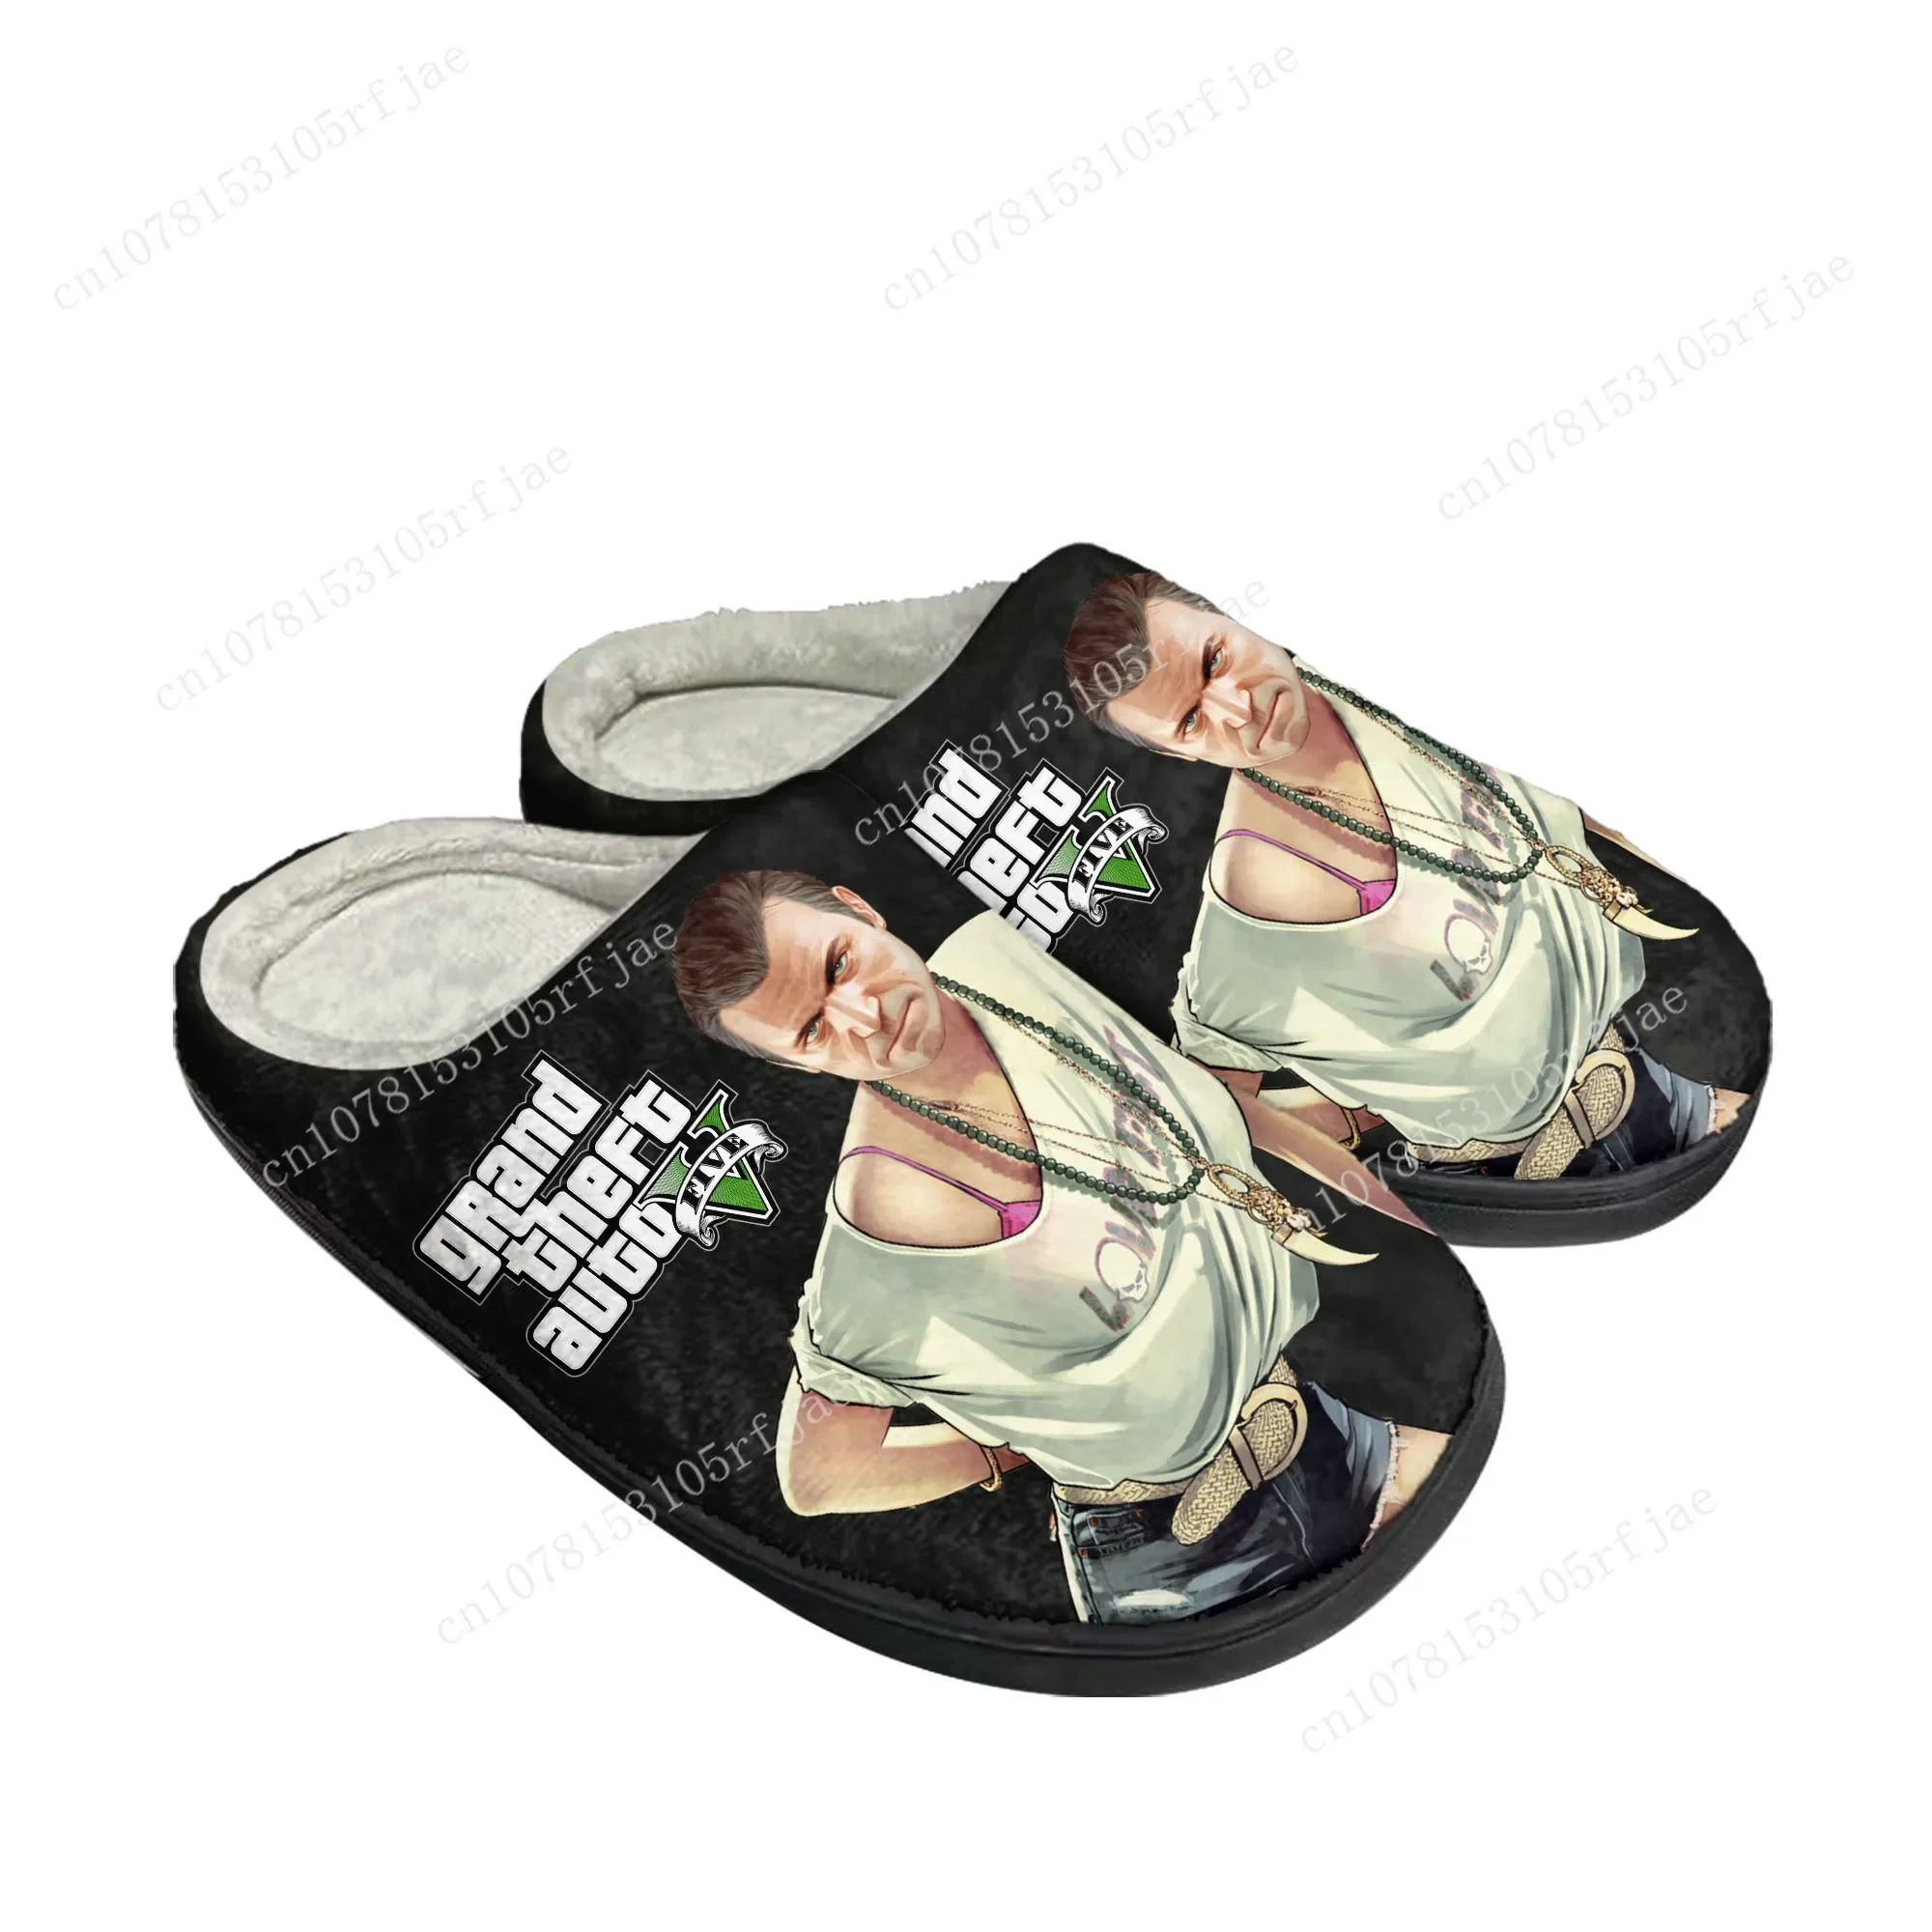 

Grand Theft Auto V 5 Home Cotton Slippers Mens Womens GTA Five Plush Bedroom Casual Keep Warm Shoes Game Tailor Made Slipper